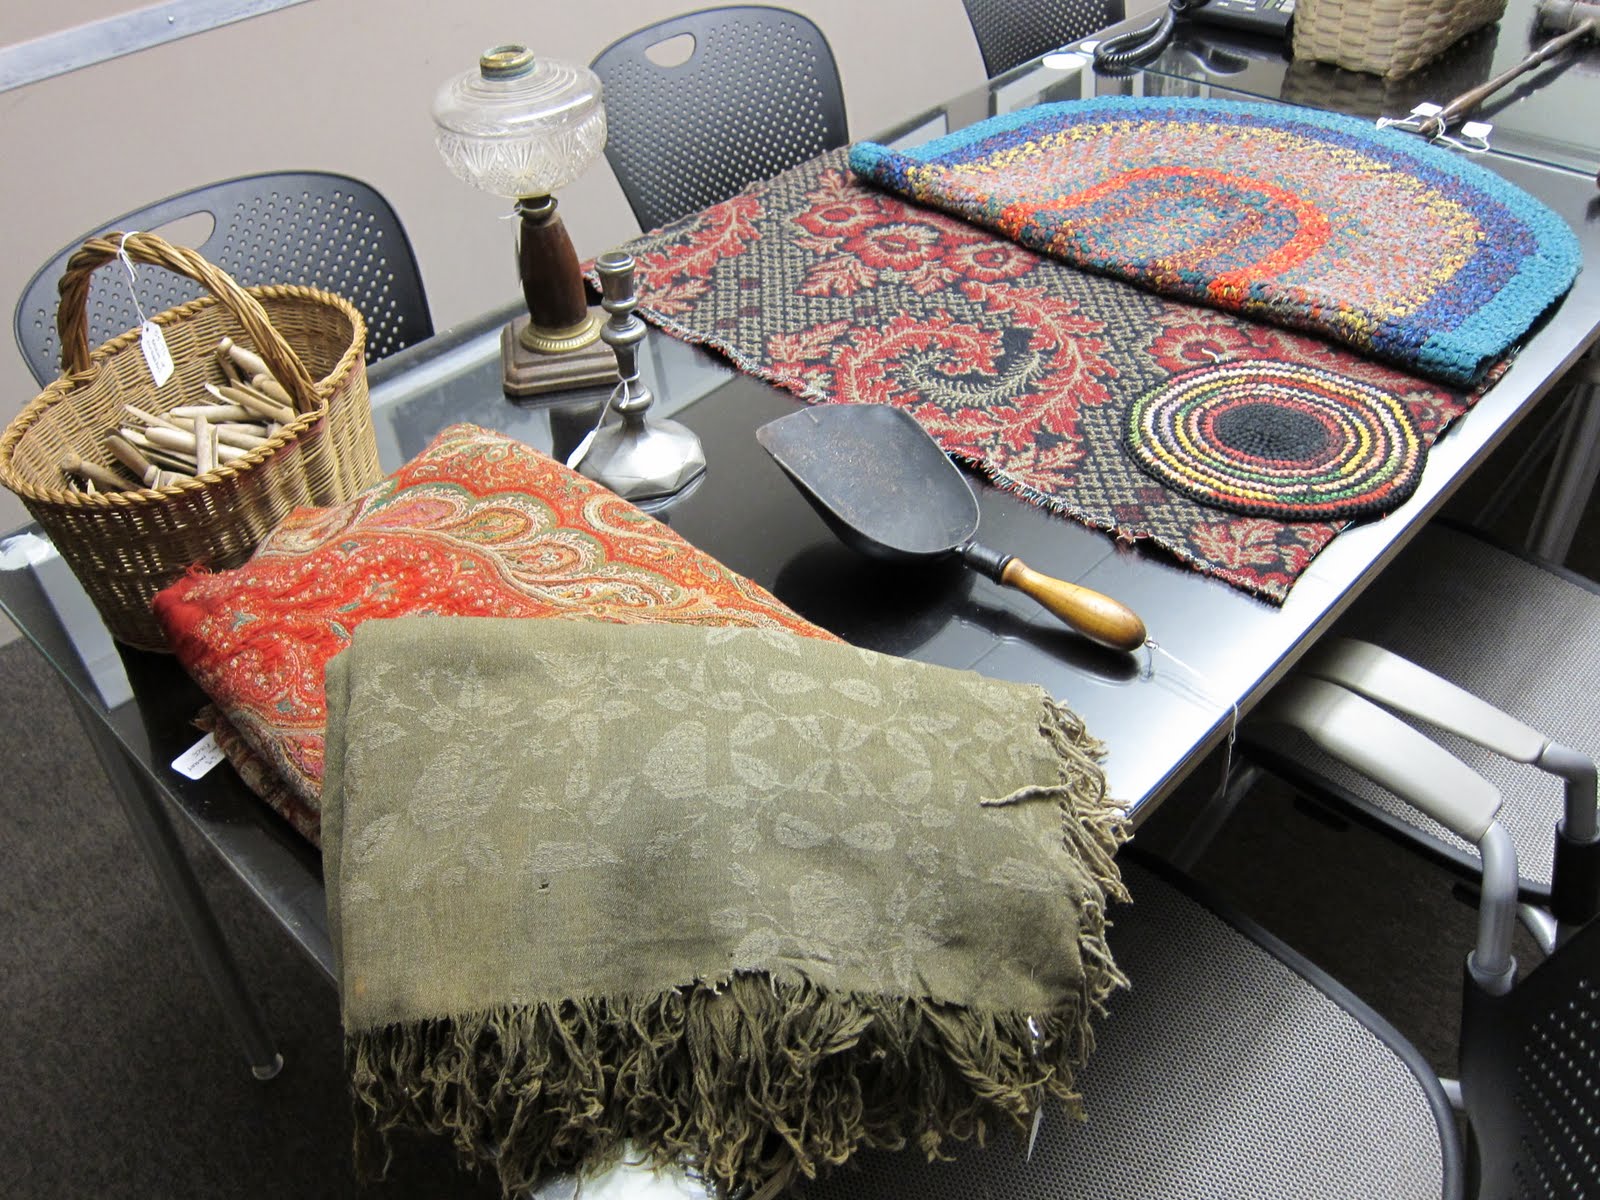 Objects found at flea market for the Shop Life tour at the Museum - which include some fabrics, a carpet, and a forged trowel scoop